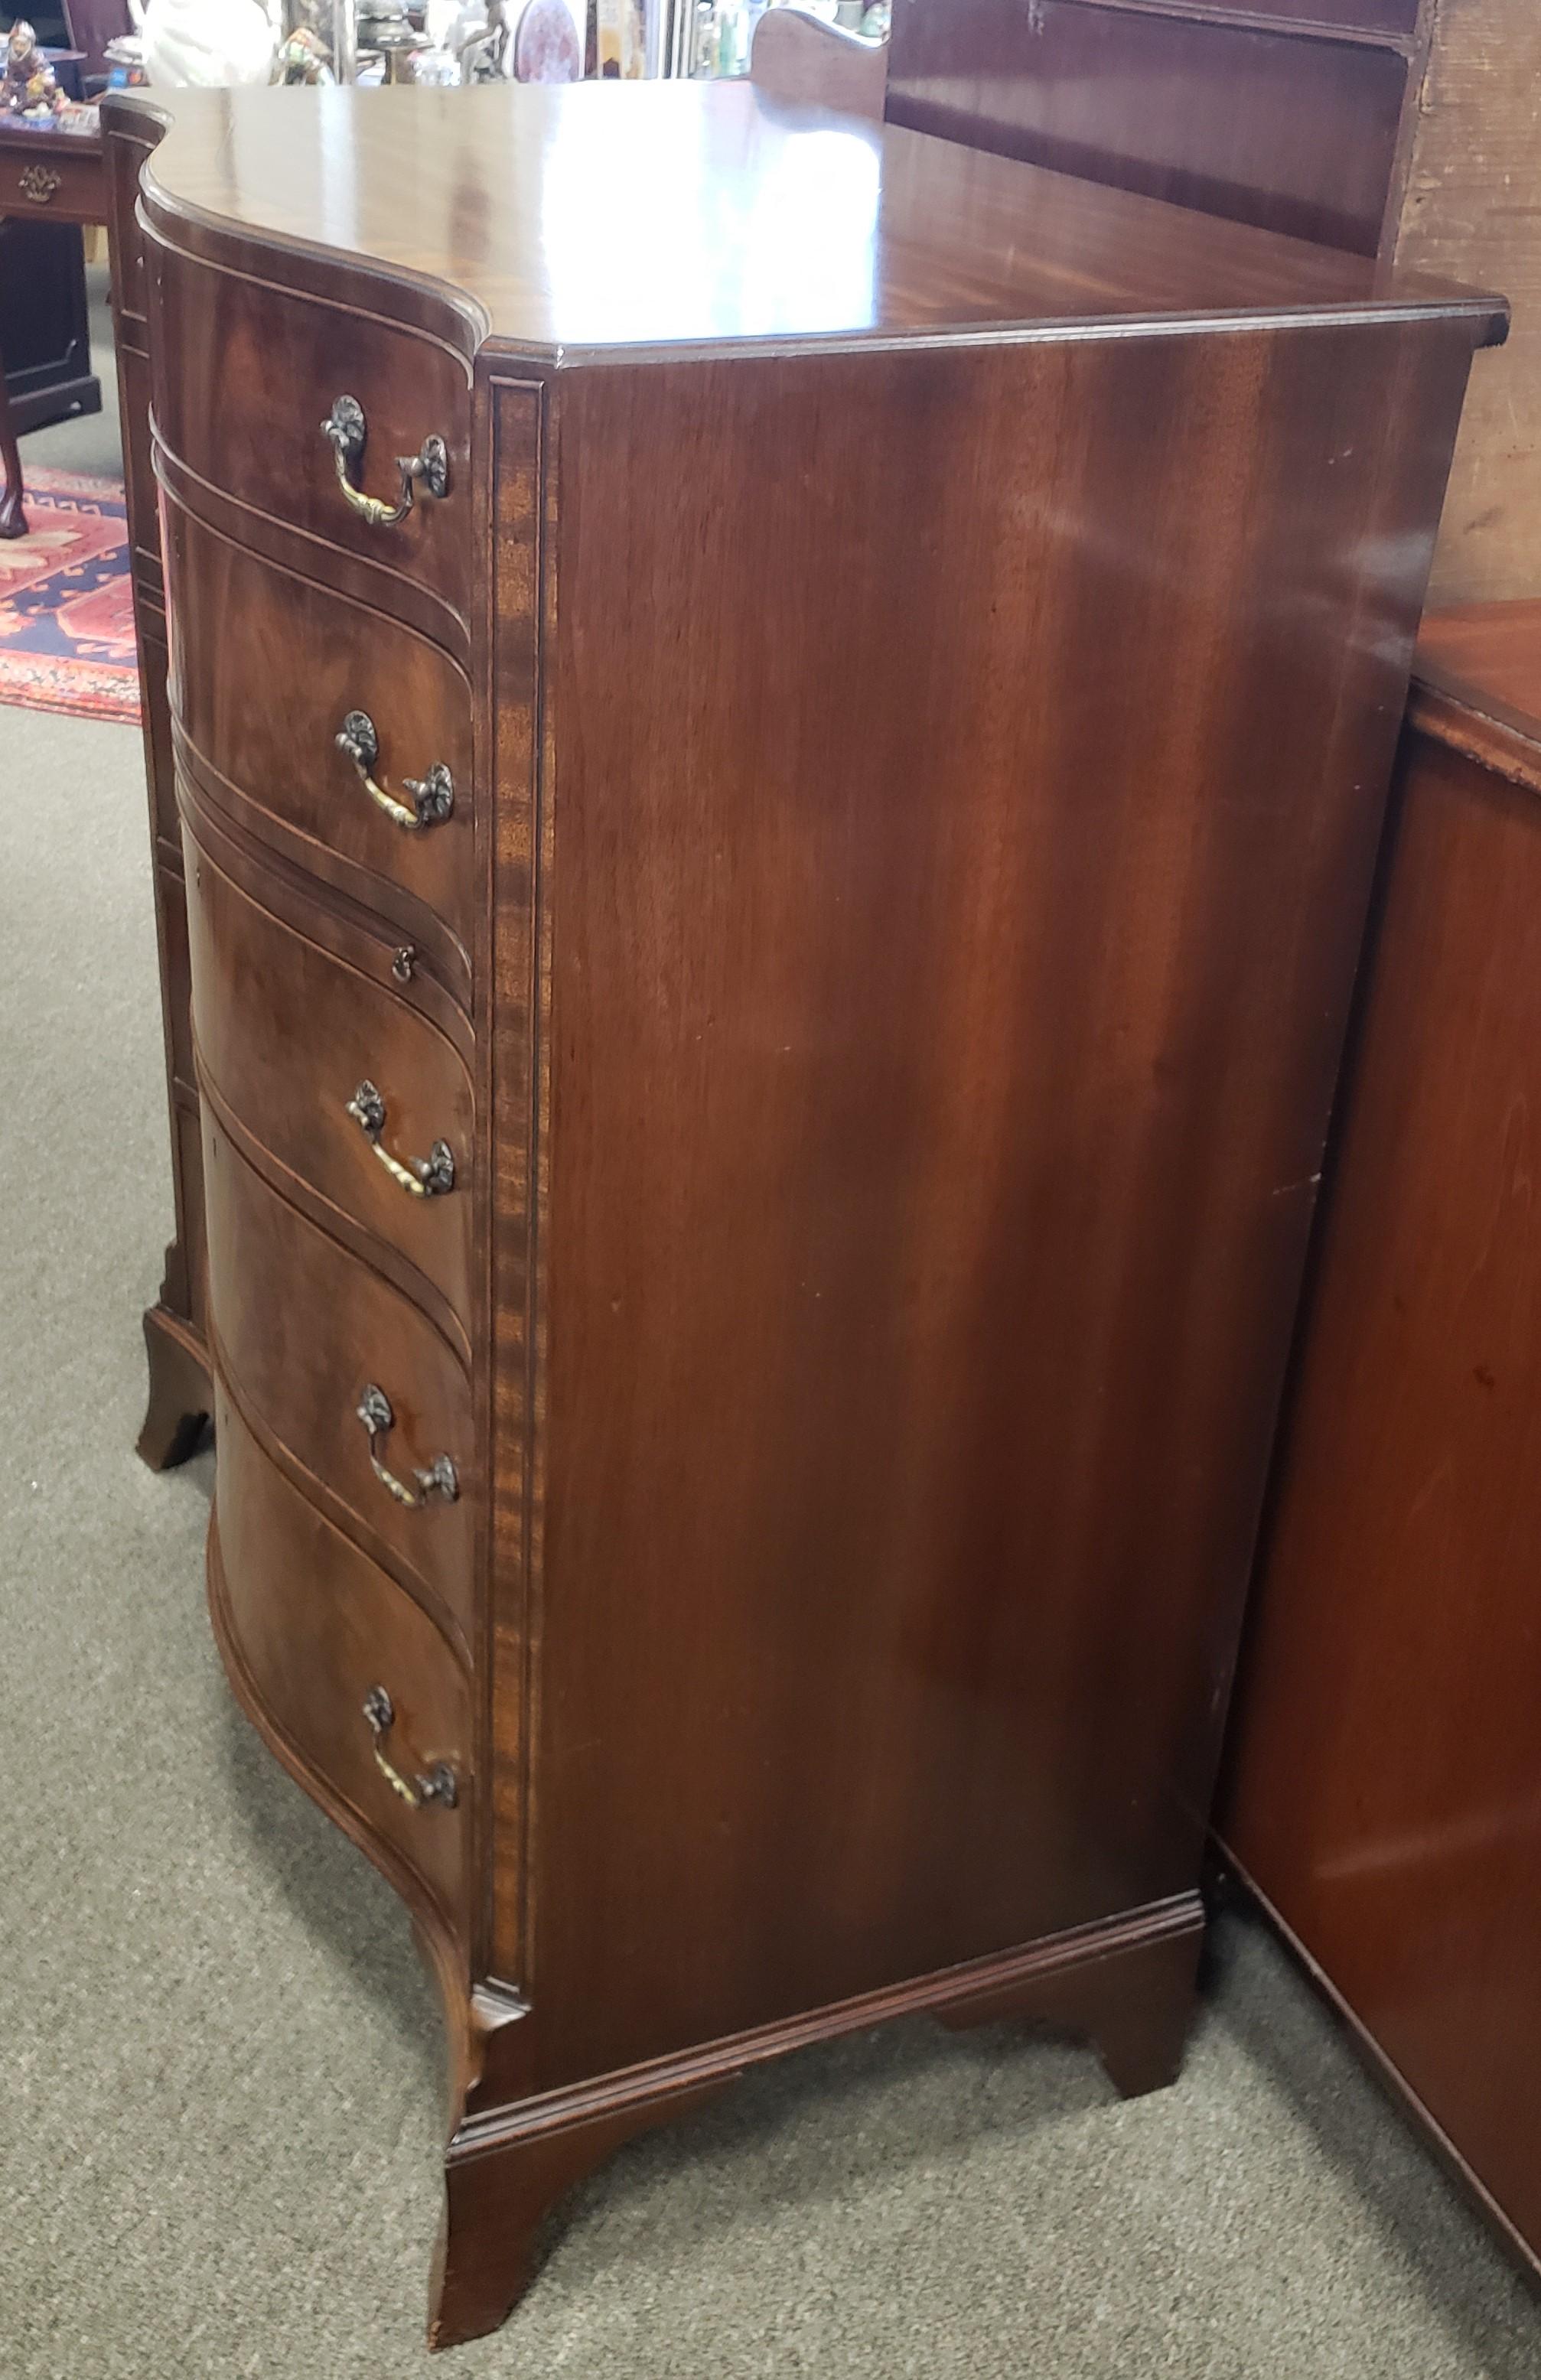 Victorian mahogany serpentine chest of drawers with inlay and crossbanding. The top of the chest is fiddle back mahogany while the front is flame mahogany. This piece also features a pullout / pull-out writing surface.